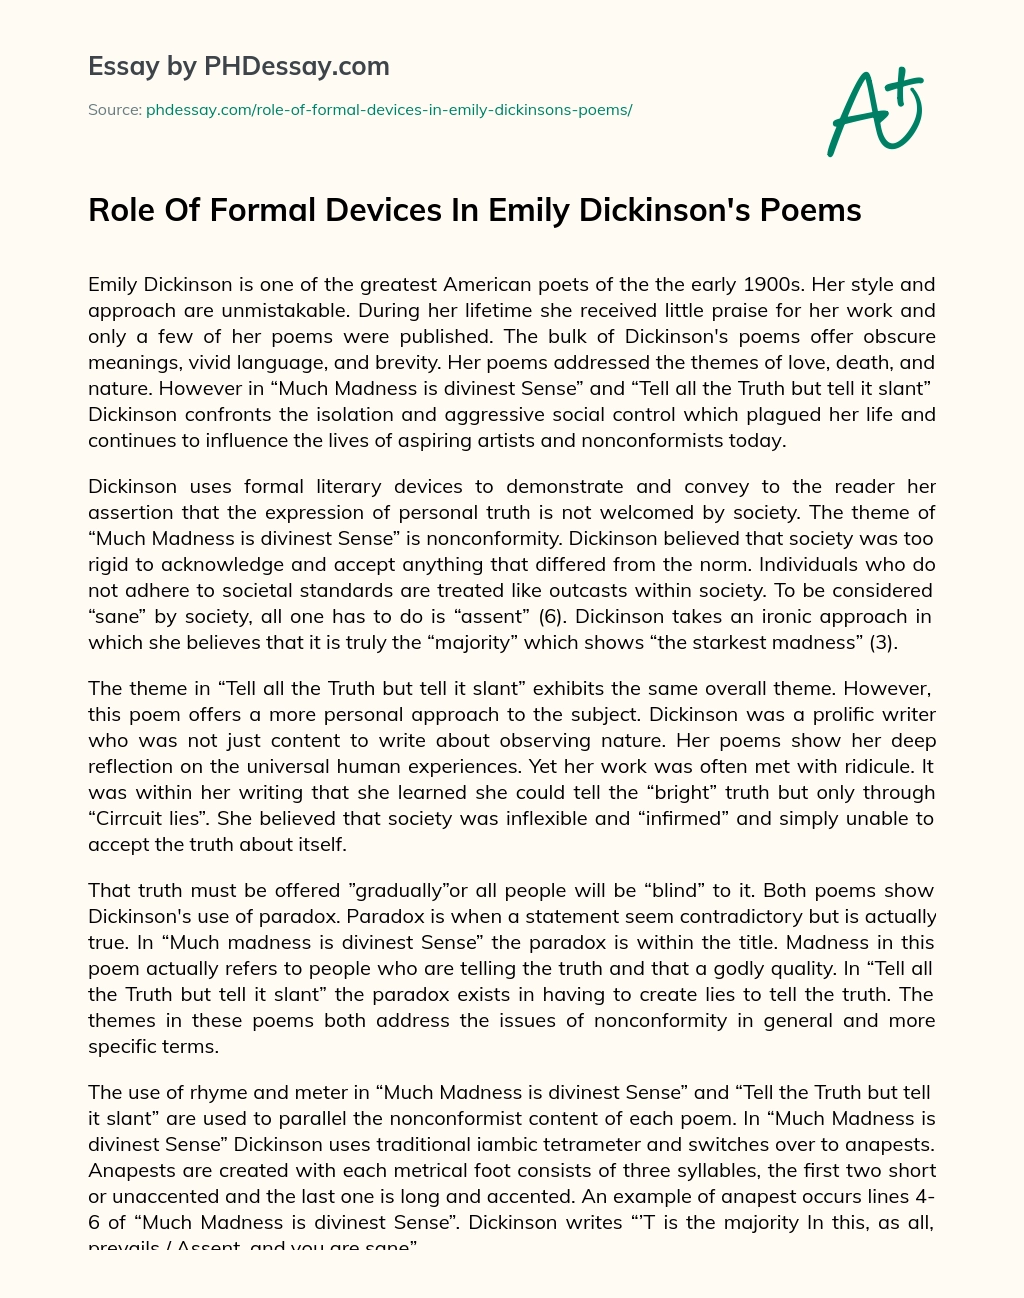 Role Of Formal Devices In Emily Dickinson’s Poems essay